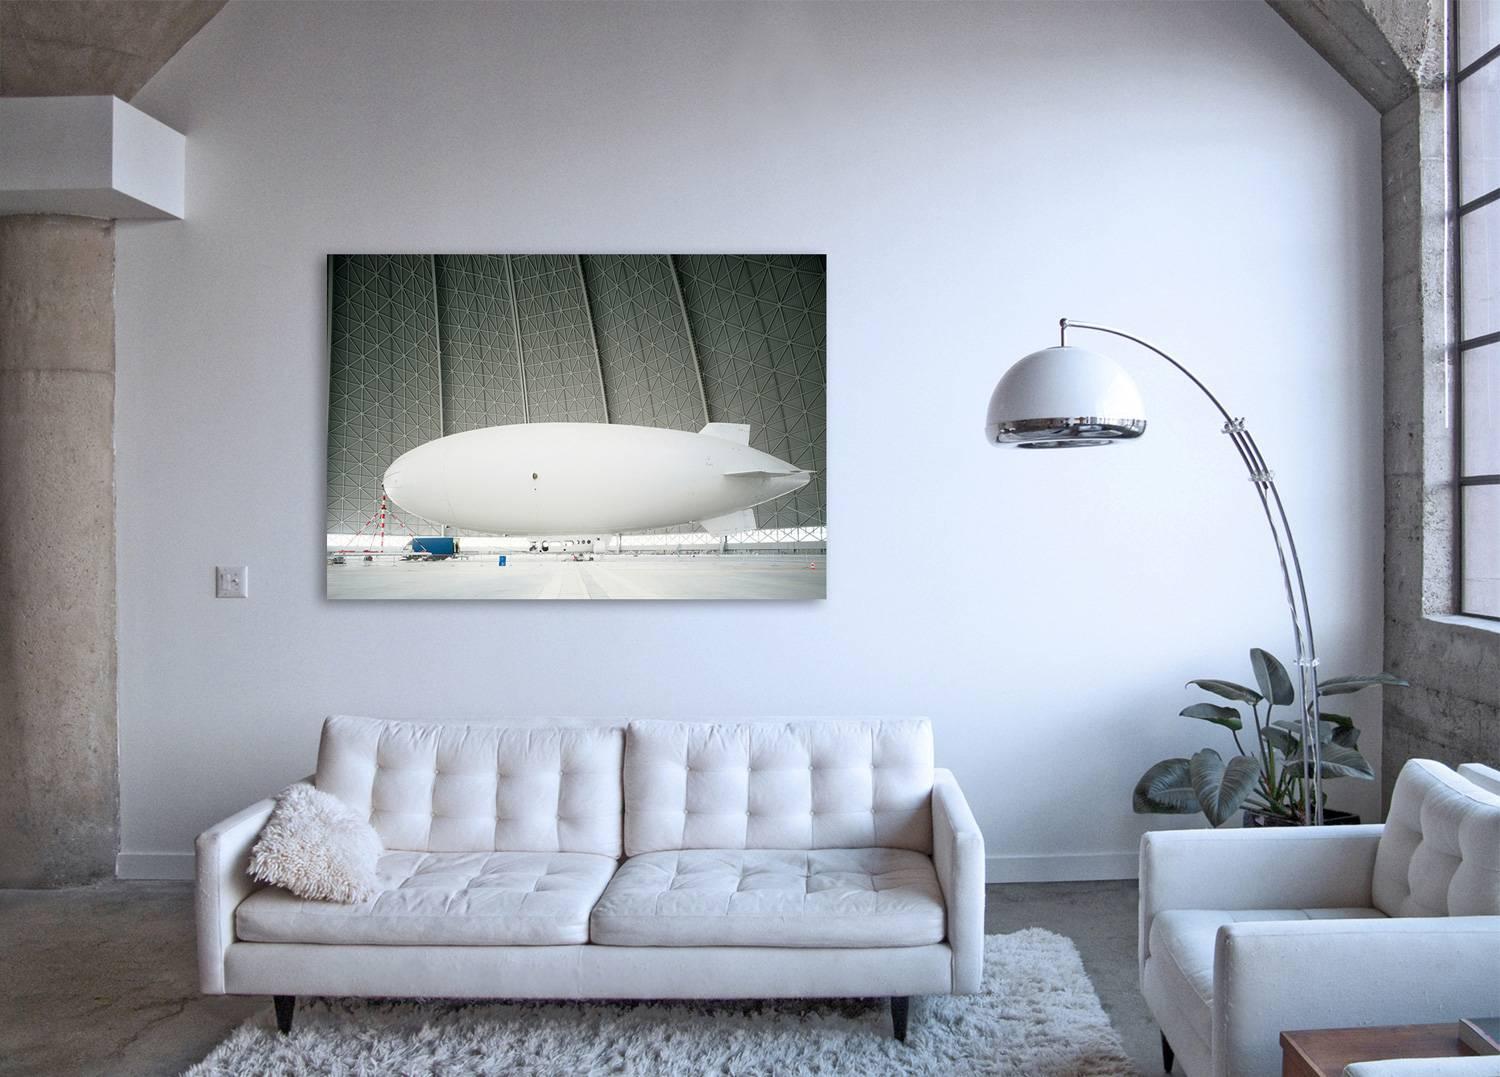 Zeppelin (framed) - monumental photograph of iconic pioneering airship in hangar - Photograph by Christian Stoll